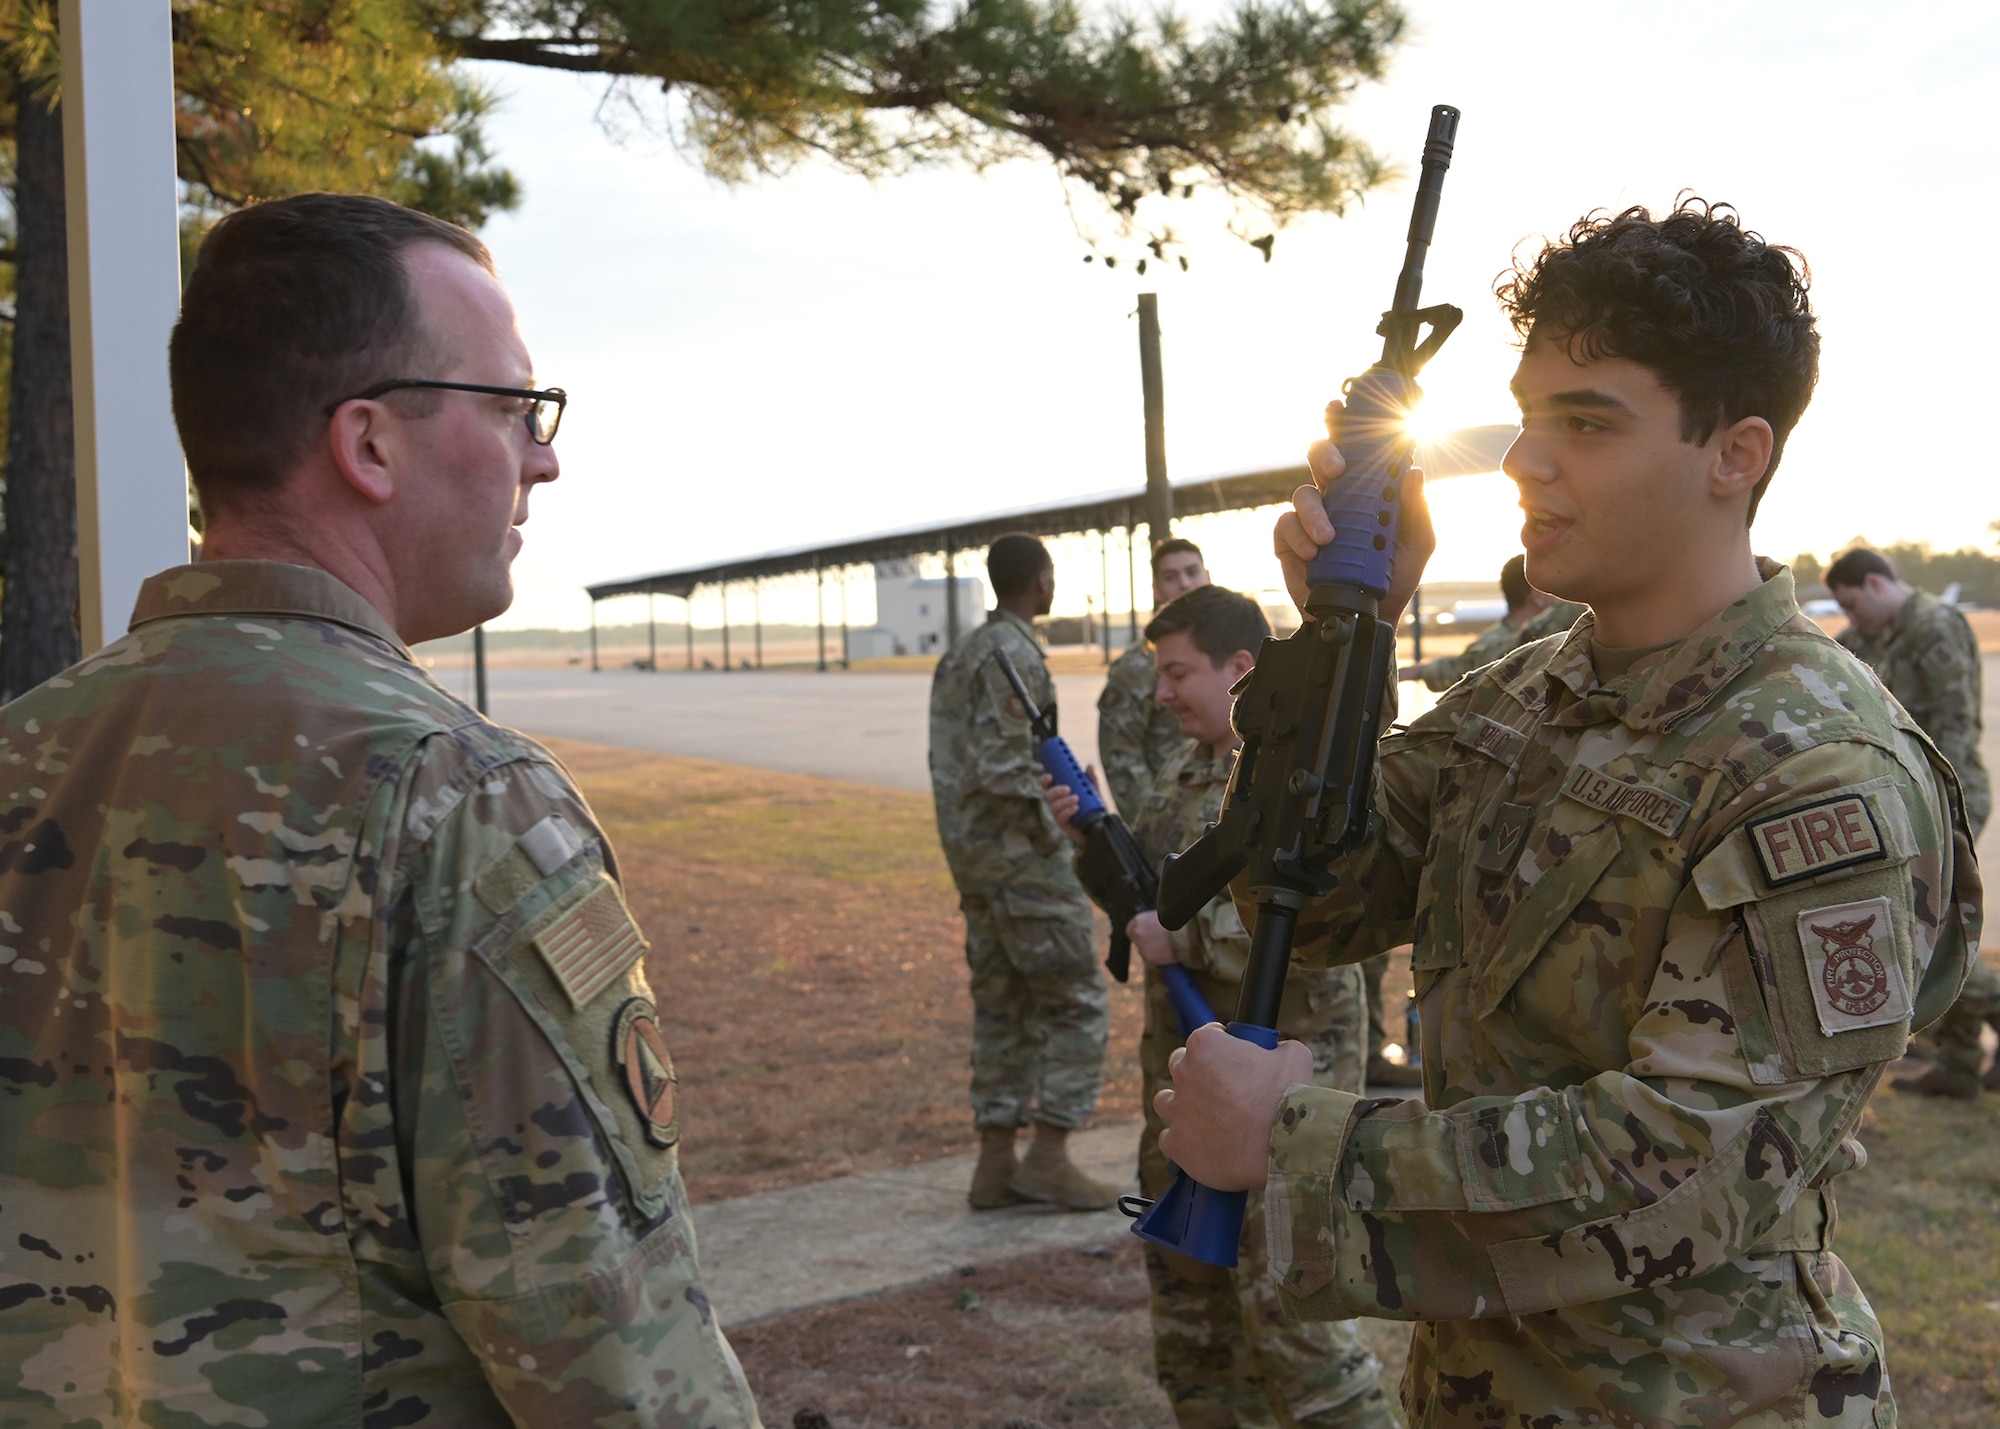 Two Airmen inspect a training rifle.